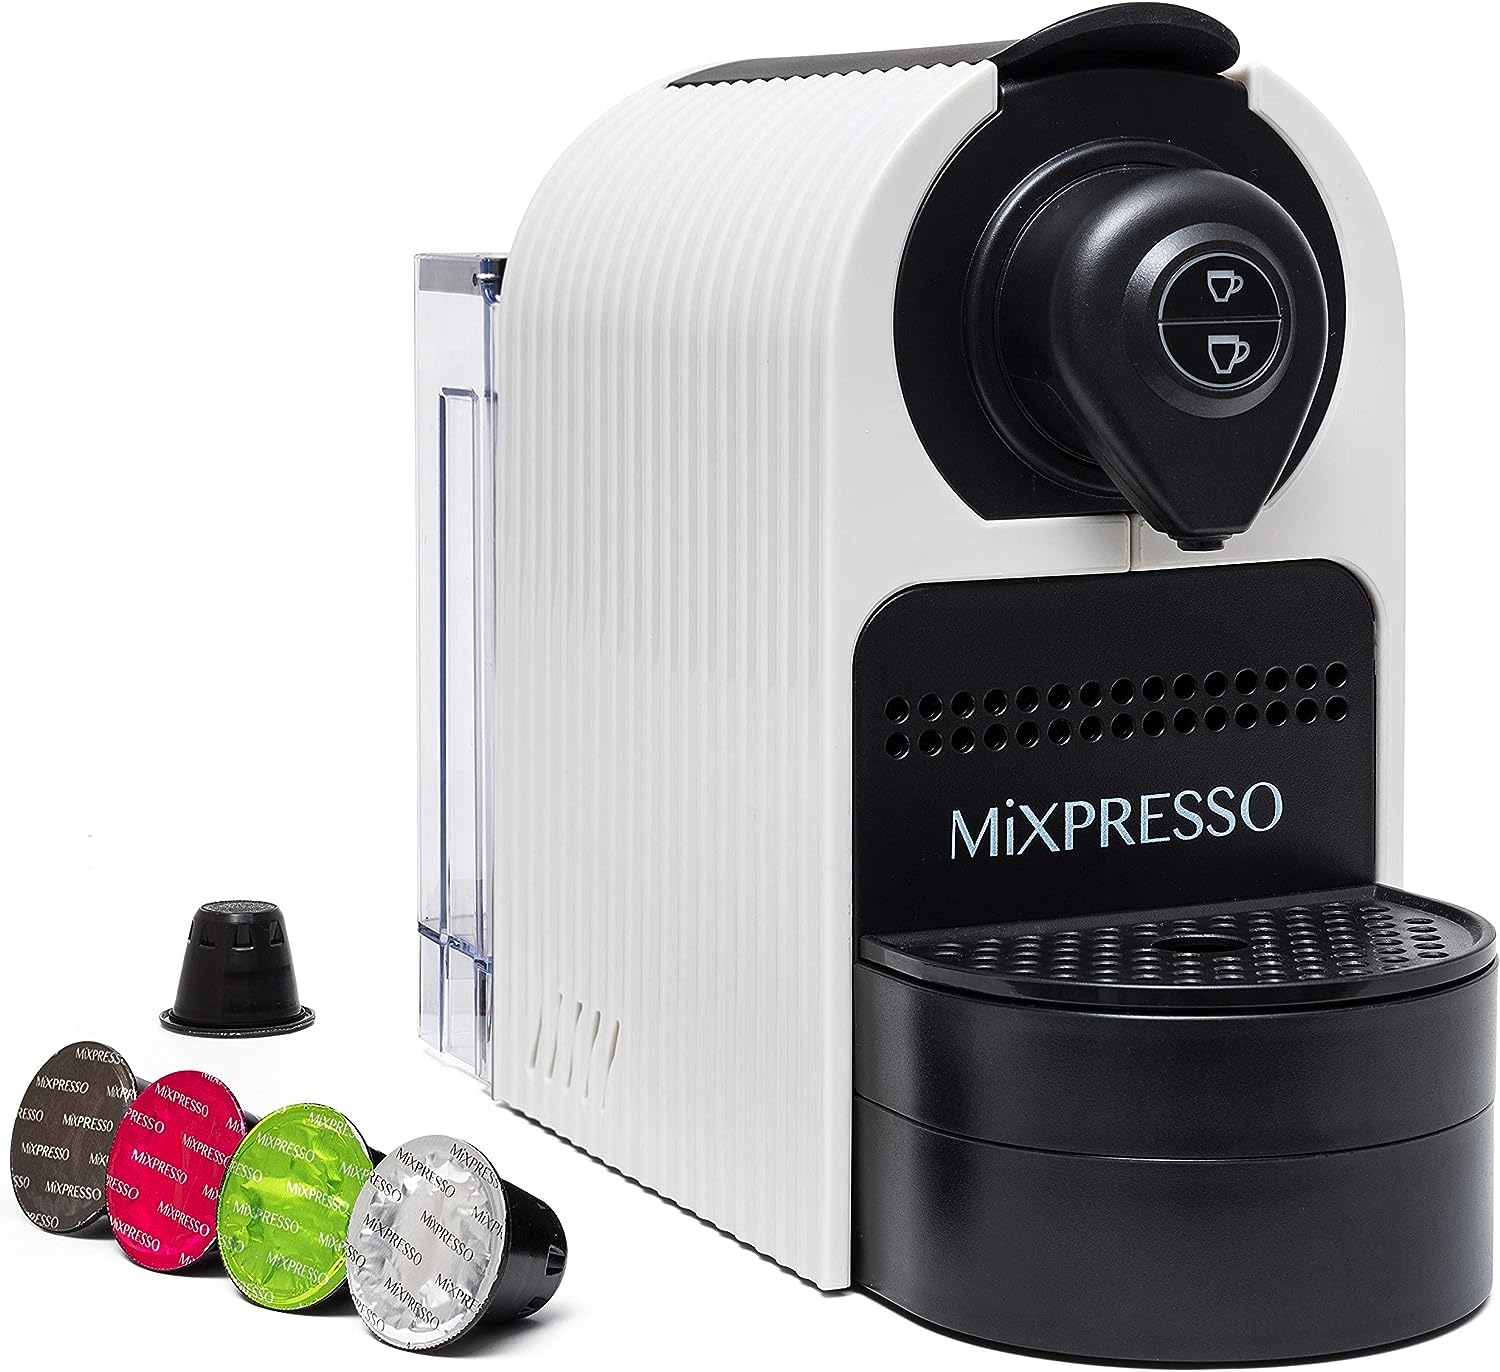 Mixpresso Single Cup Coffee Maker | Personal Single Serve Coffee Brewer Machine Compatible with Single-Cups | Quick Brew Technology Programmable